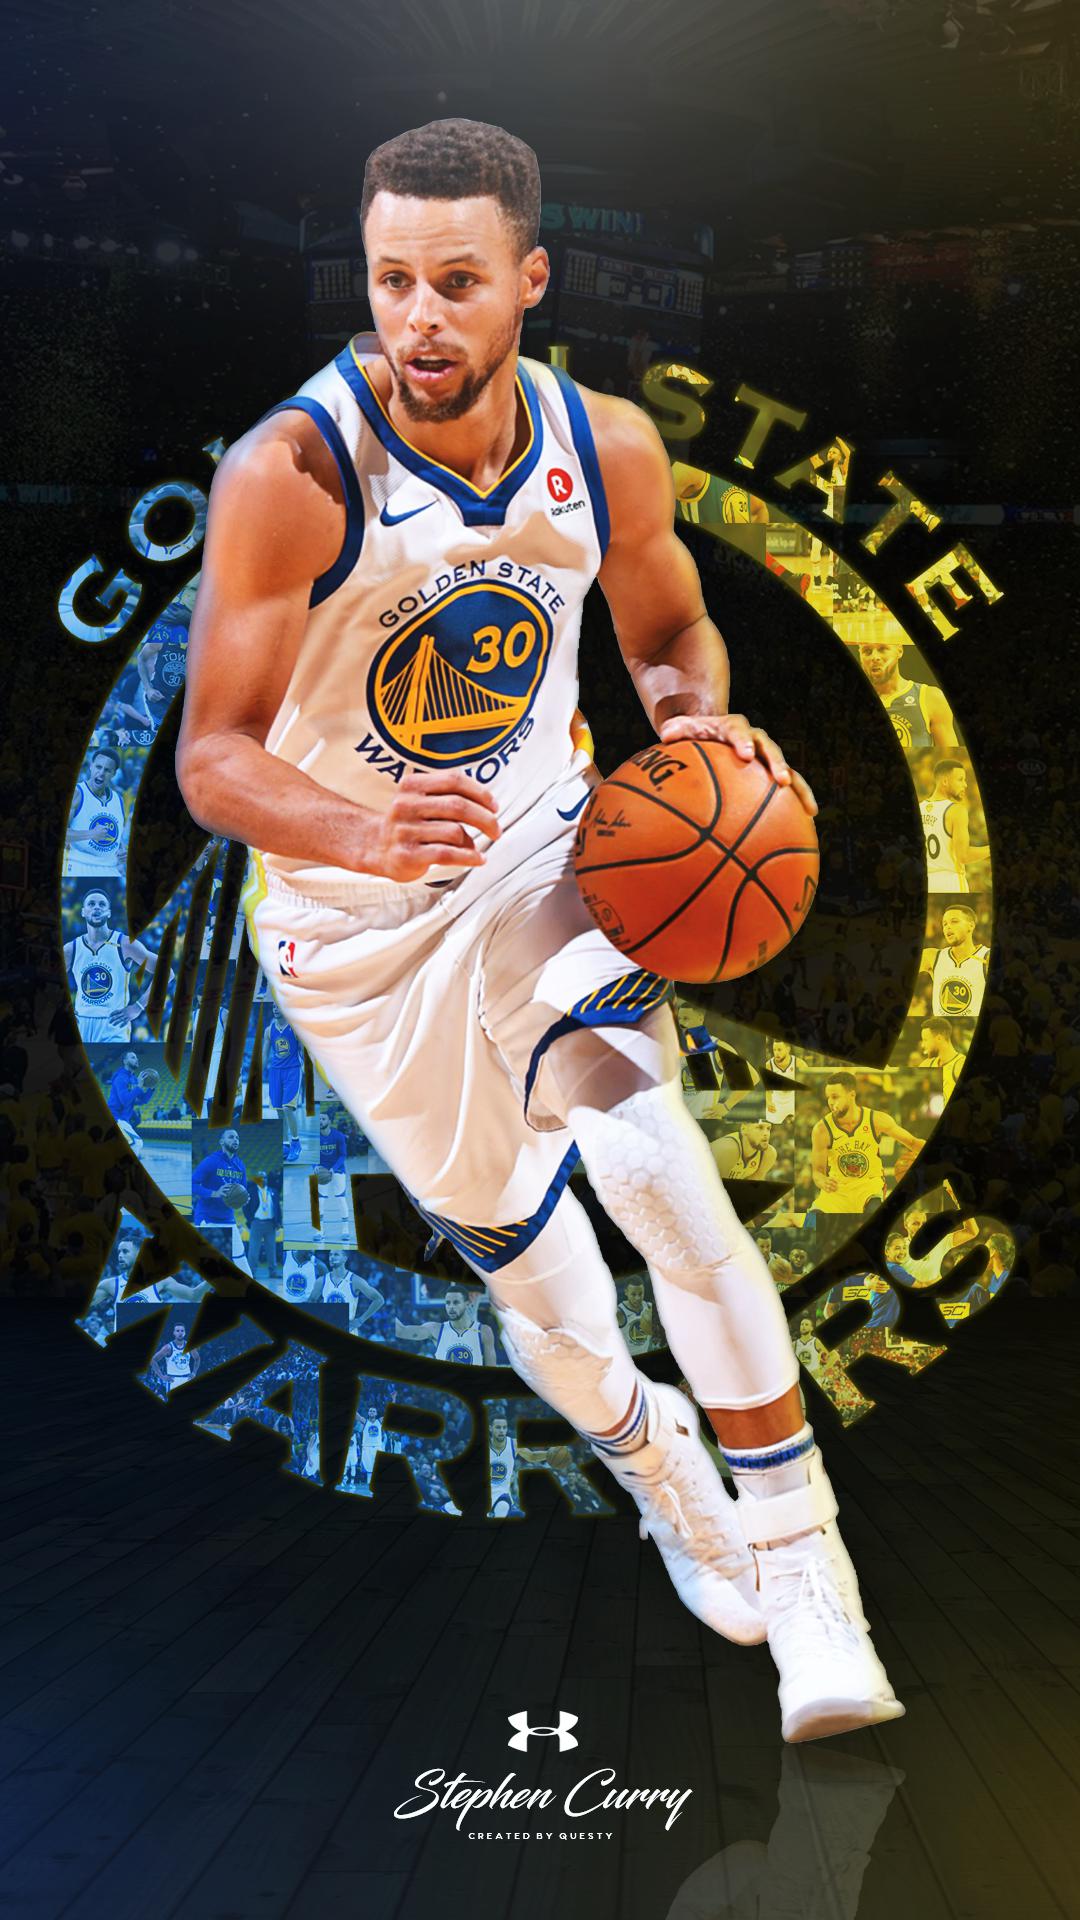 Stephen Curry Wallpaper Iphone - KoLPaPer - Awesome Free ...